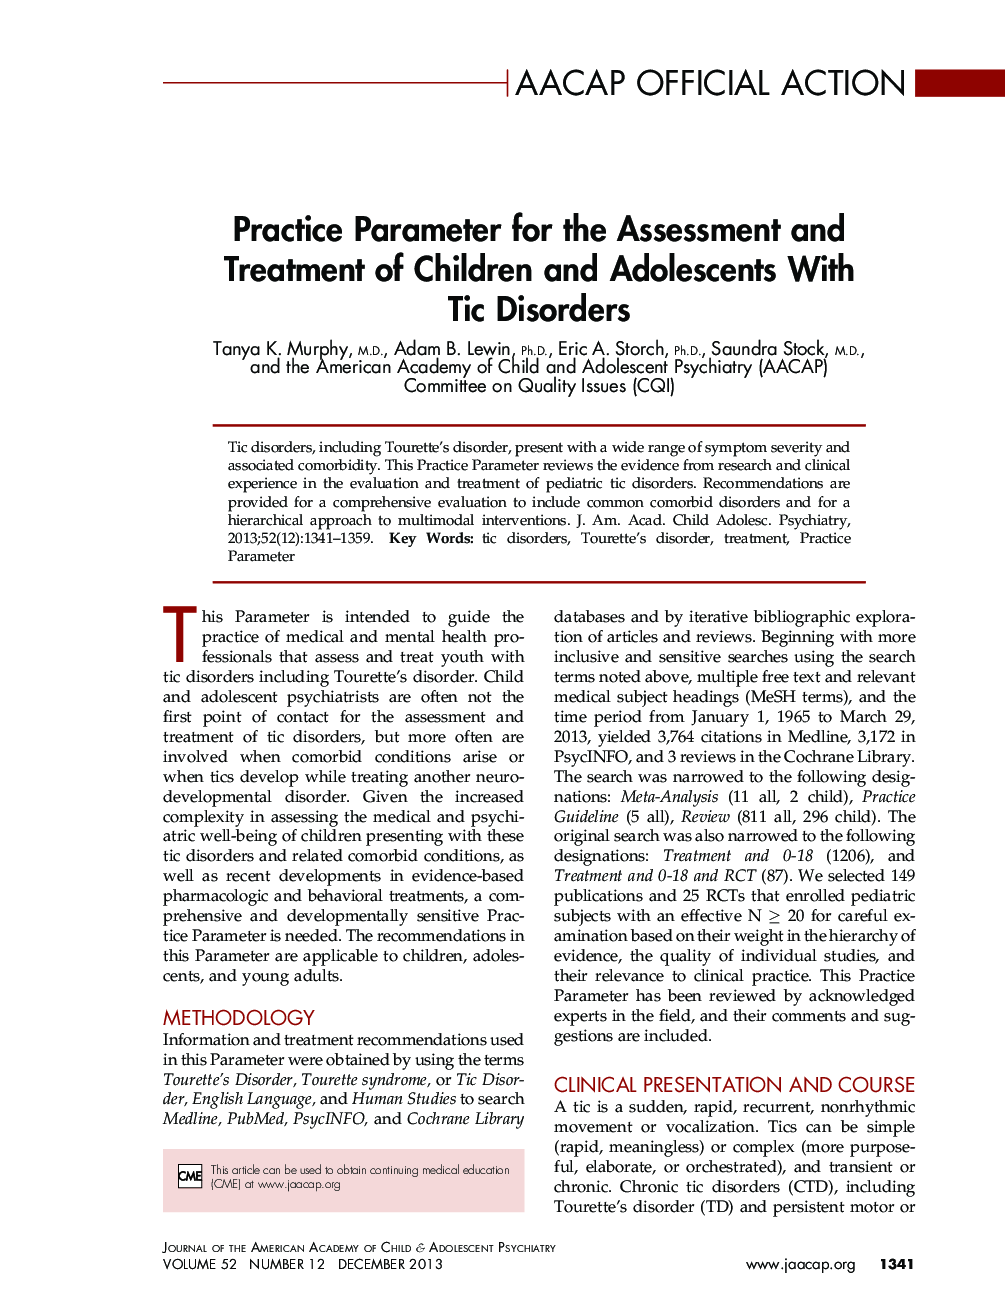 Practice Parameter for the Assessment and Treatment of Children and Adolescents With Tic Disorders